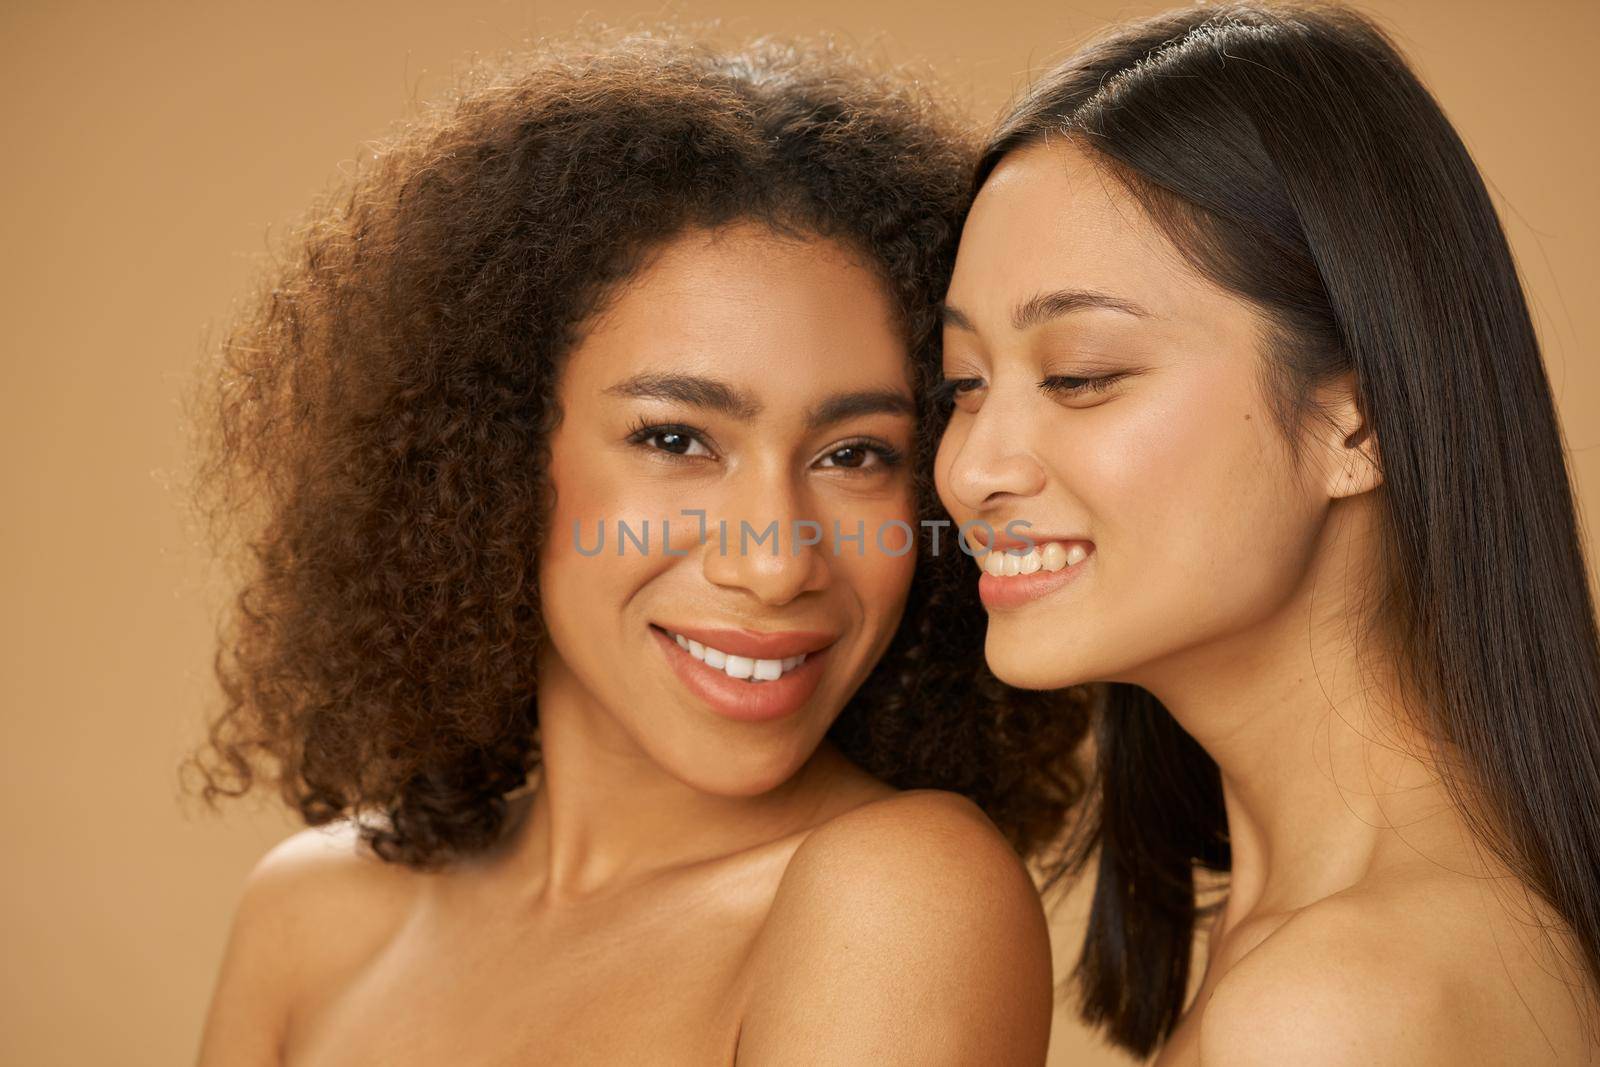 Portrait of two pretty mixed race young women with perfect smile posing together isolated over beige background. Health and beauty, diversity concept. Selective focus